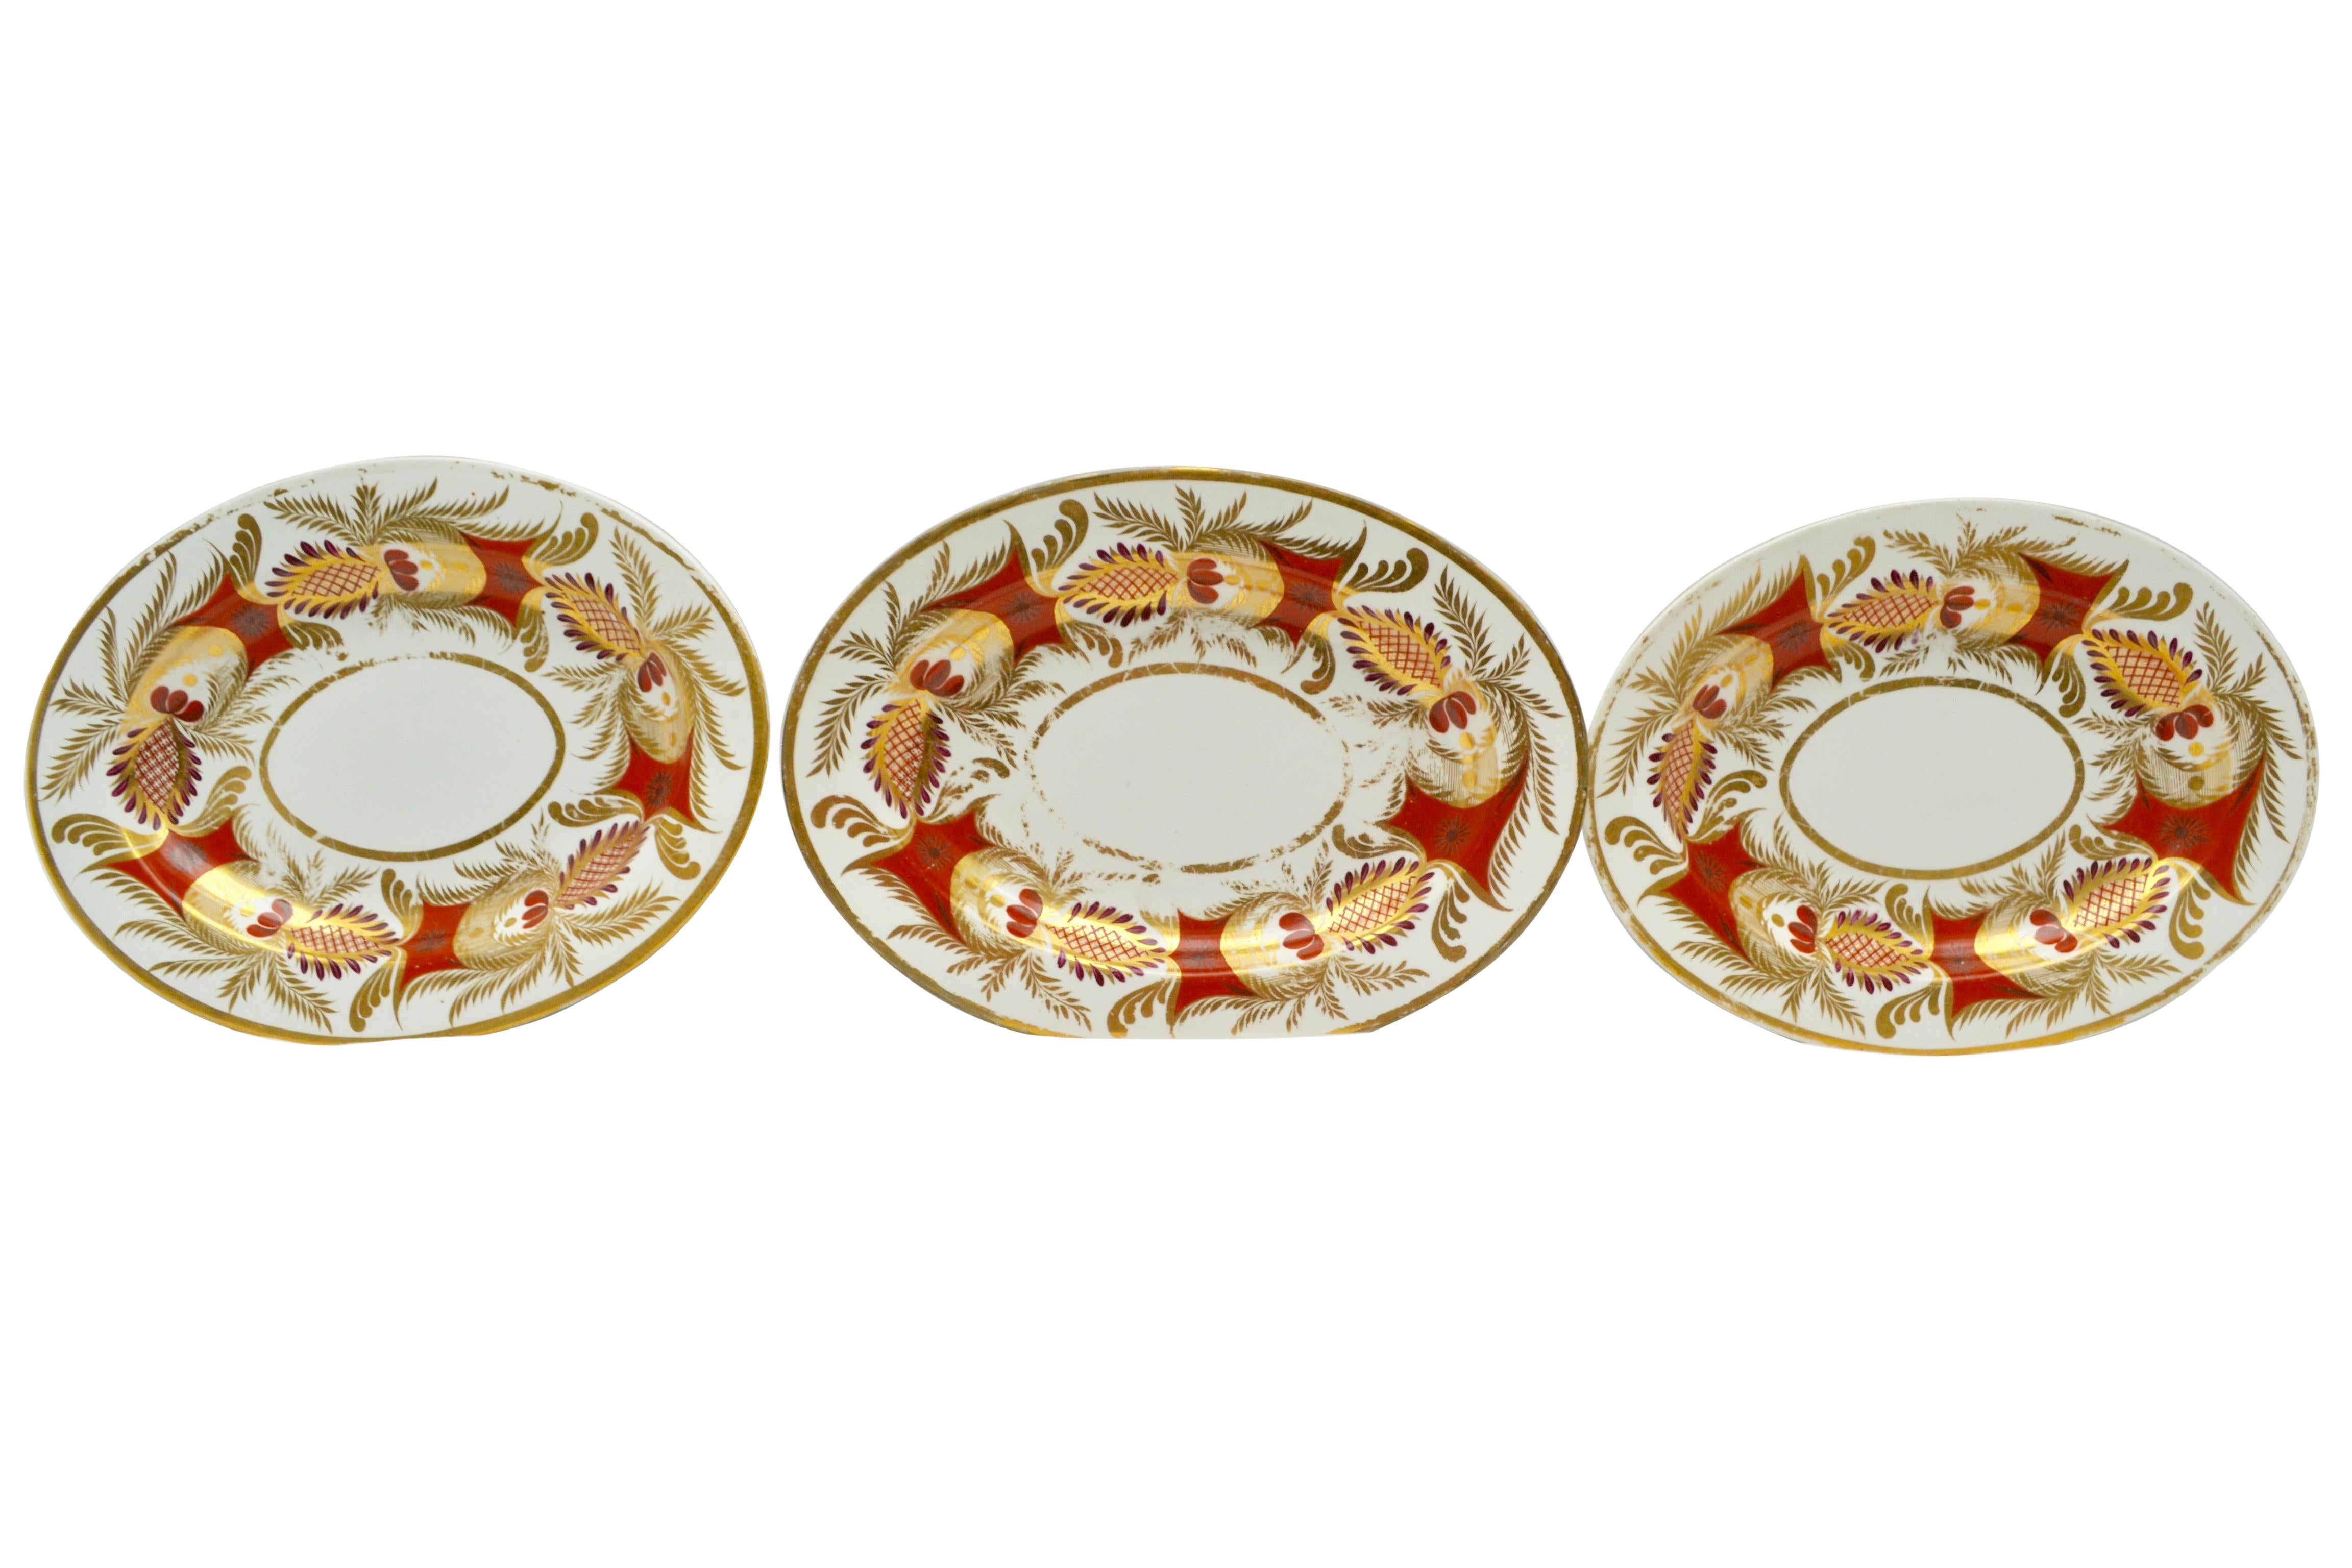 A set of three Coalport oval serving platters in coral gold and white. Some rubbing of the gilding but there are no cracks, chips or repairs.